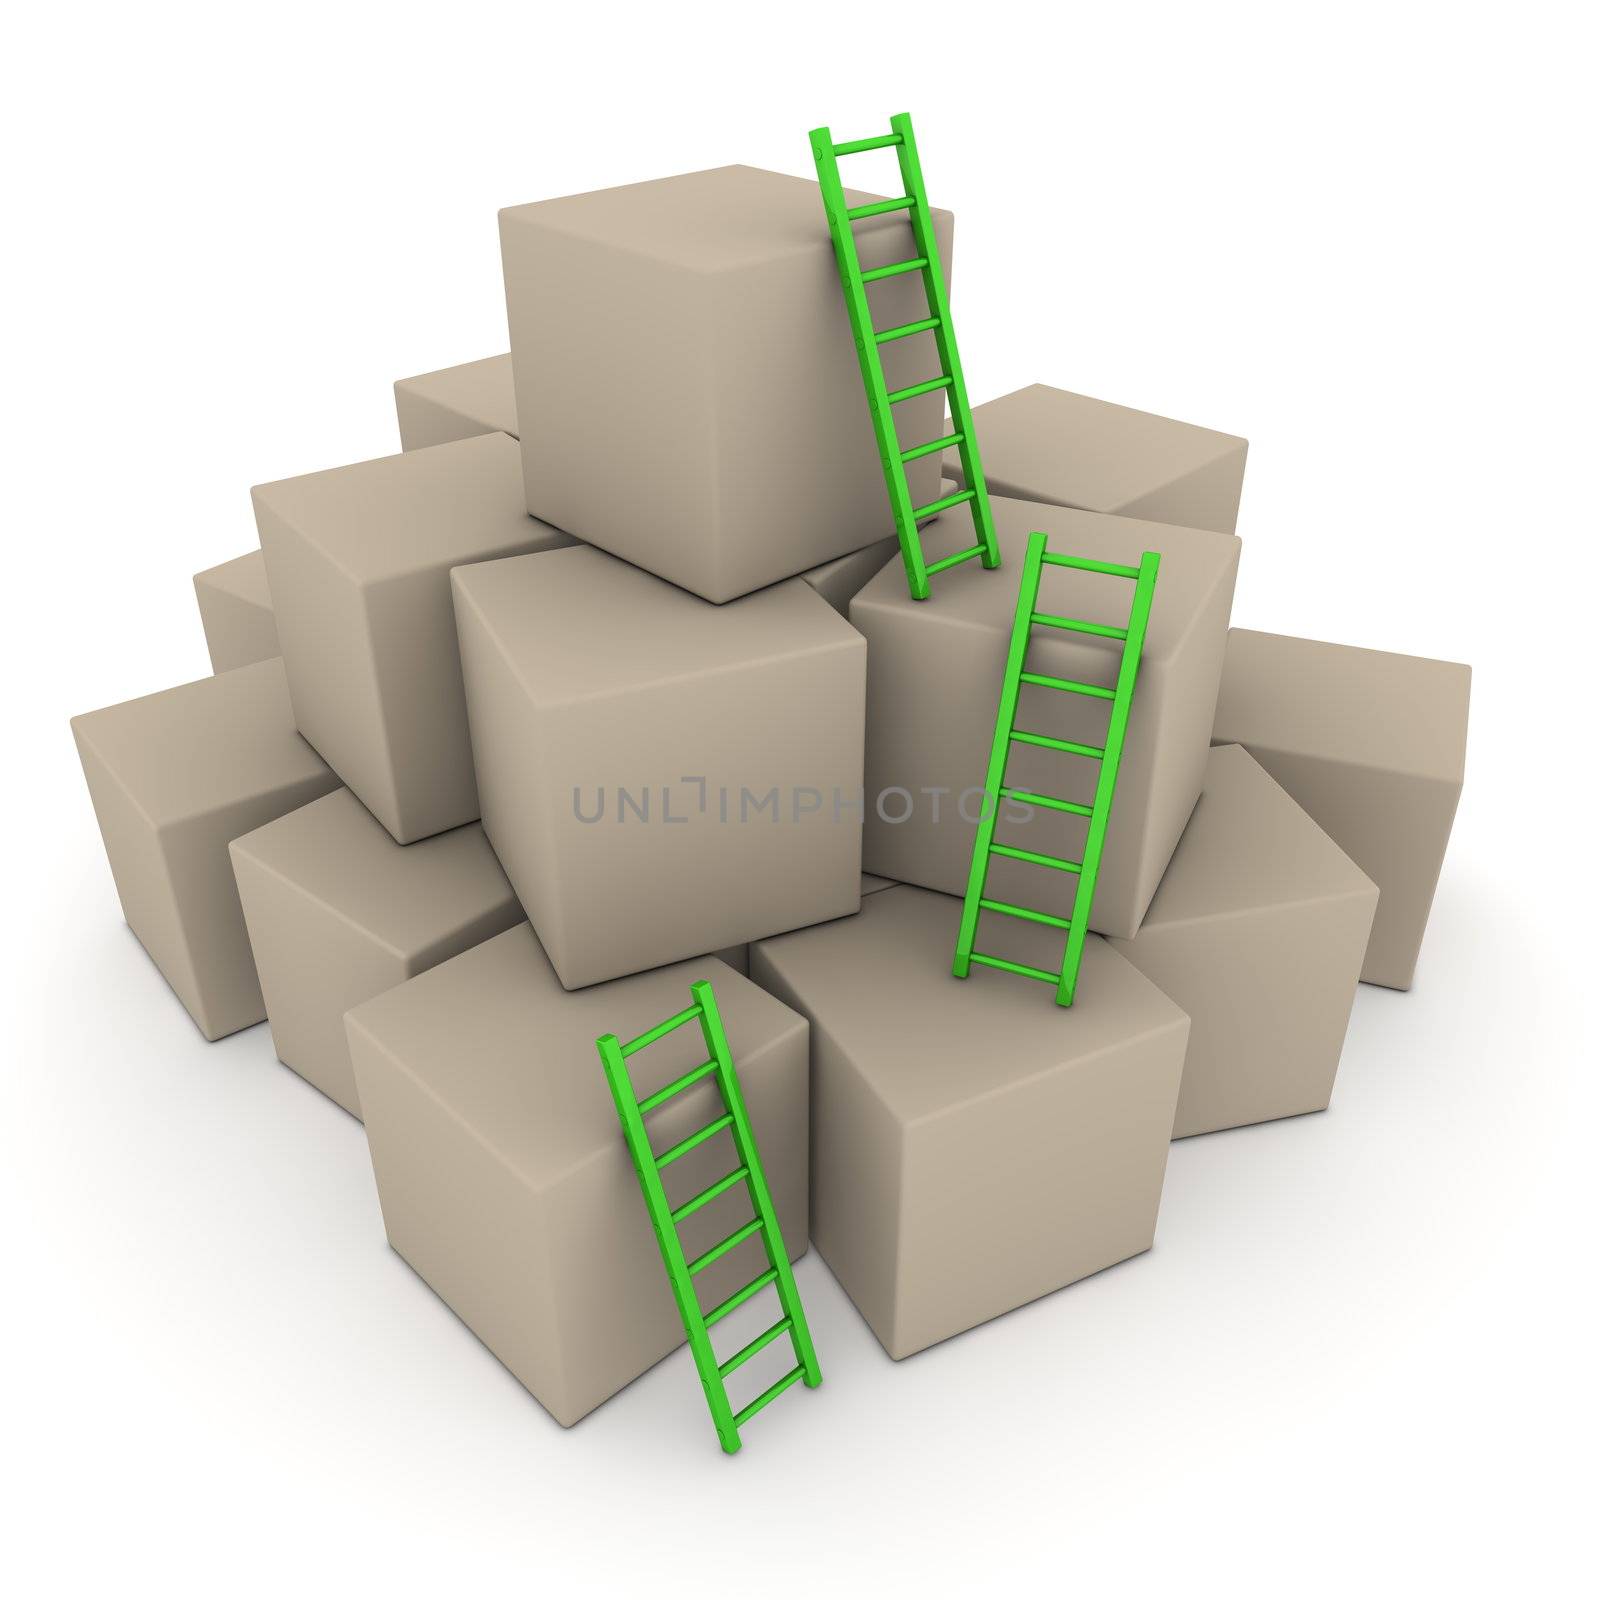 a pile of cardboard boxes - three green glossy ladders are used to climb to the top